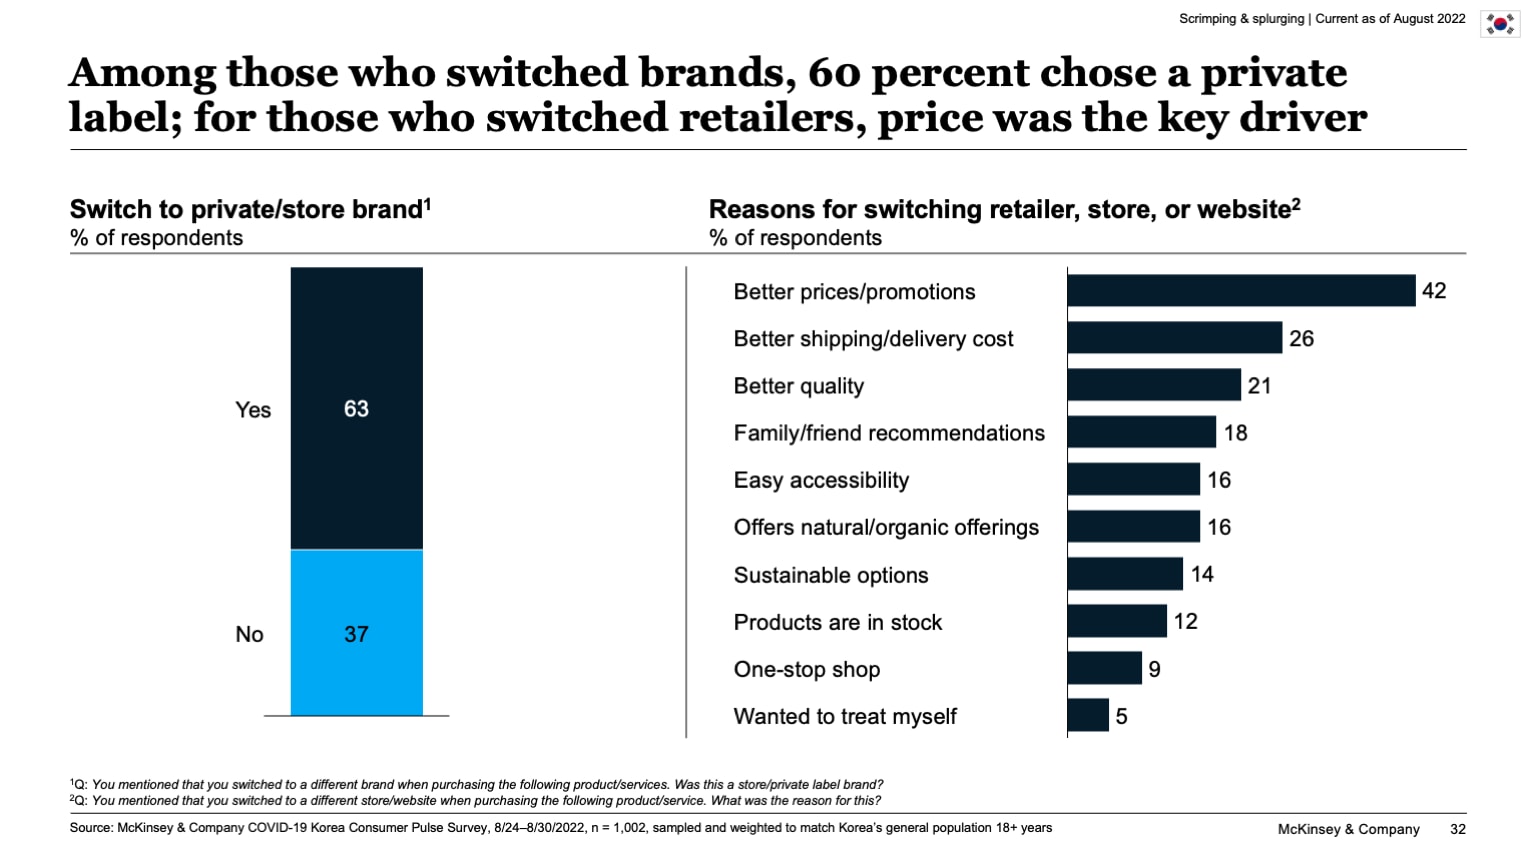 Among those who switched brands, 60 percent chose a private label; for those who switched retailers, price was the key driver